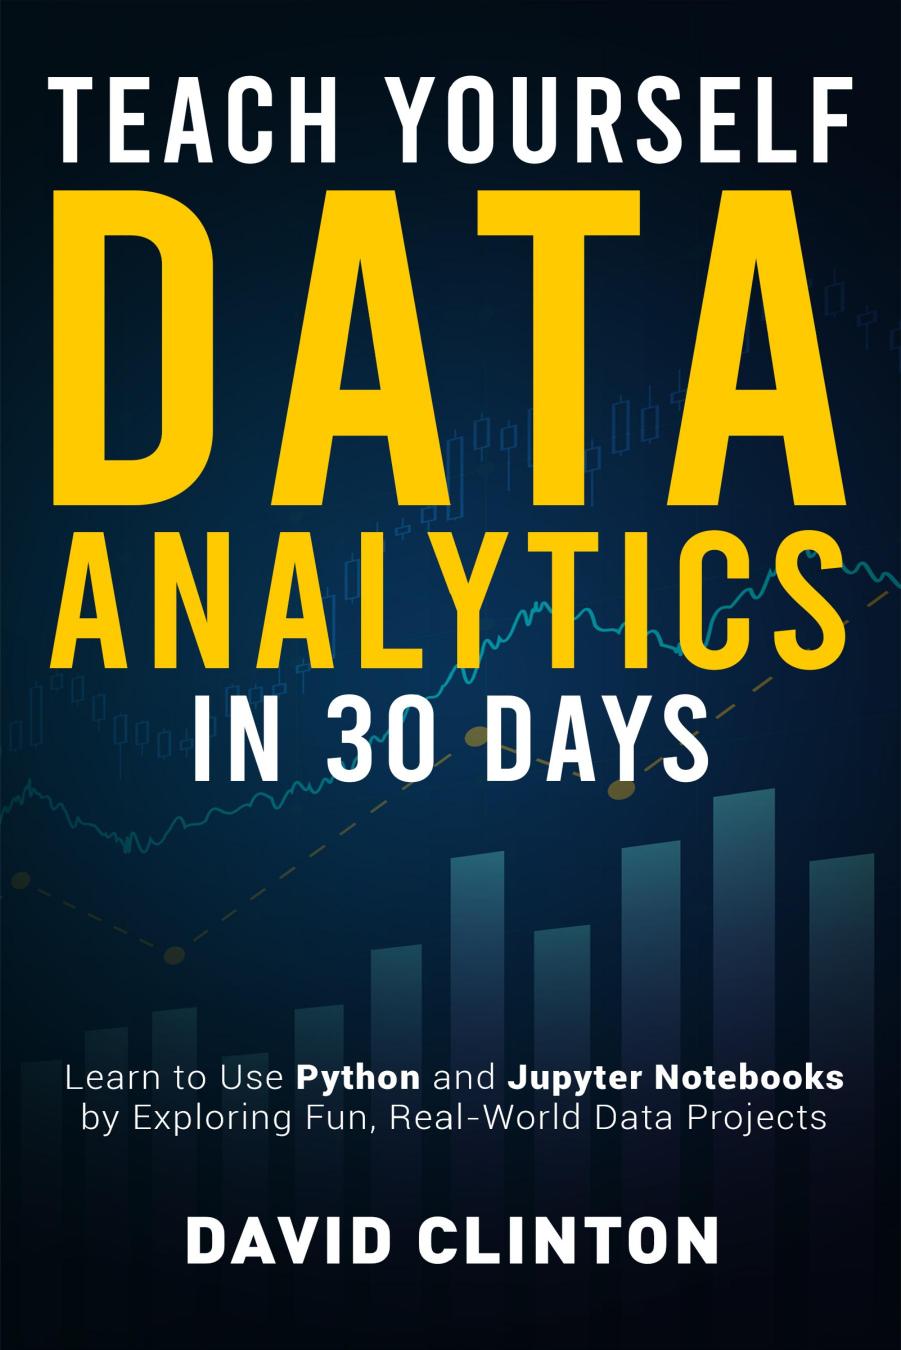 Teach Yourself Data Analytics in 30 Days: Learn to Use Python and Jupyter Notebooks by Exploring Fun, Real-World Data Projects